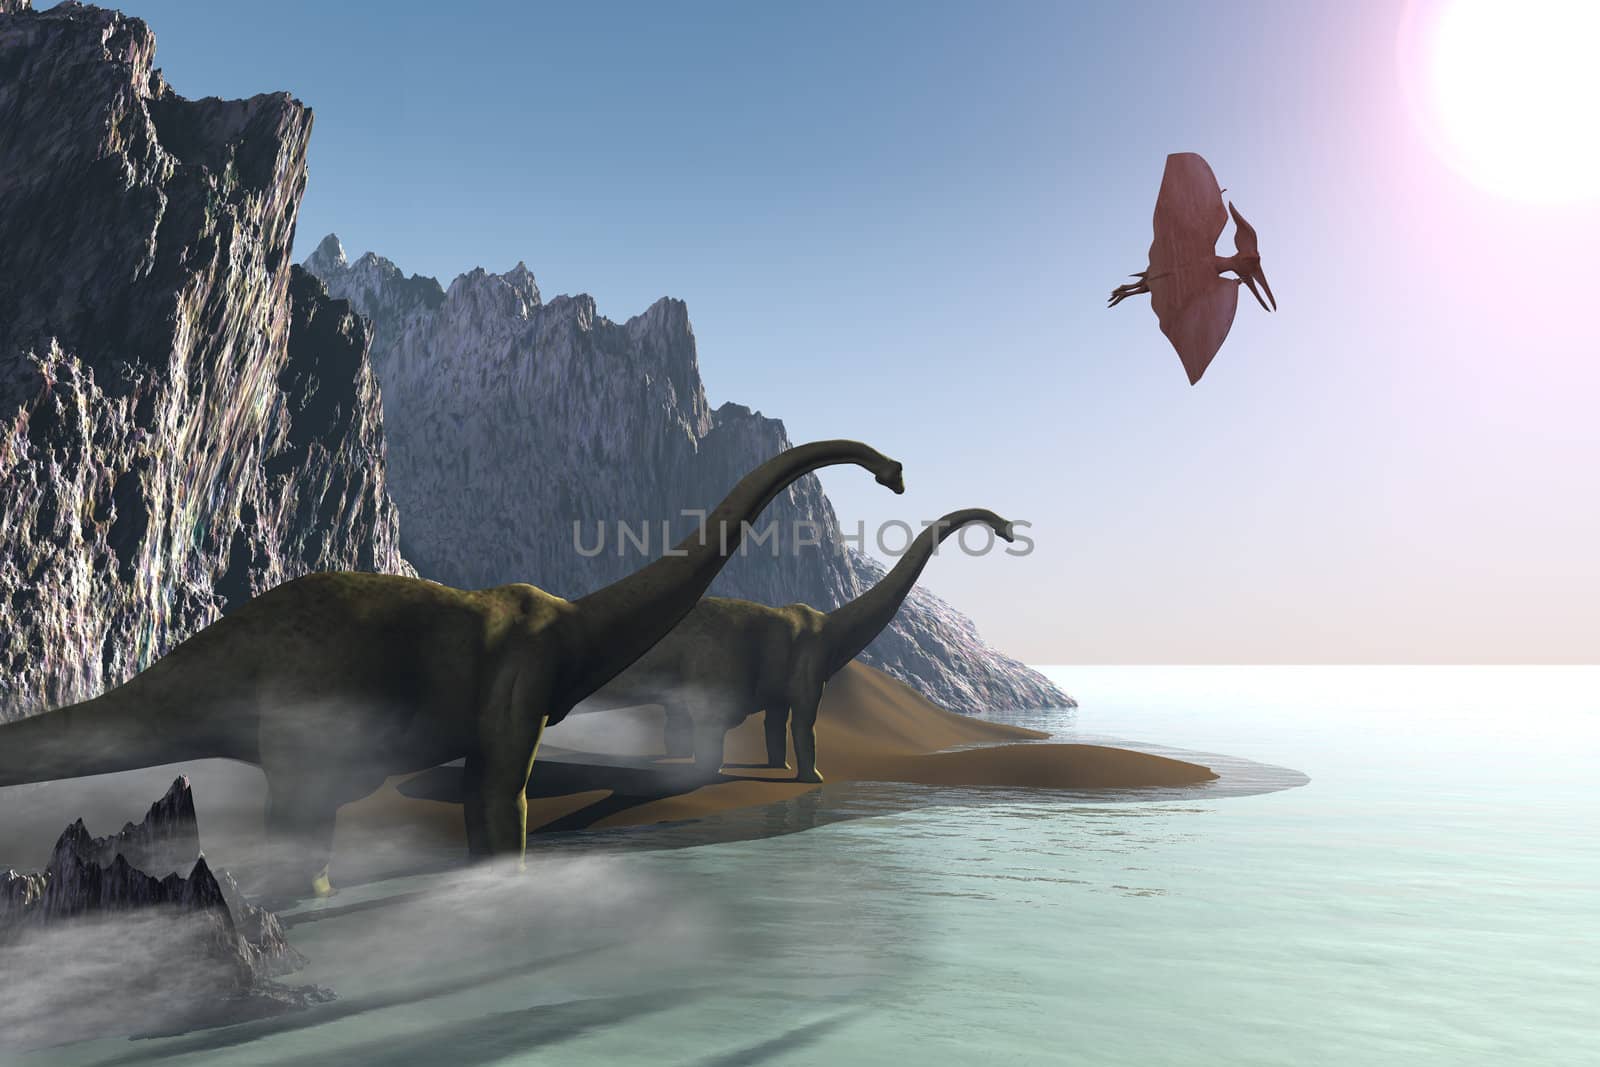 Two dinosaurs come to the shore for a drink of water. Dinosaurs in this image are Diplodocus and Pterodactyl.